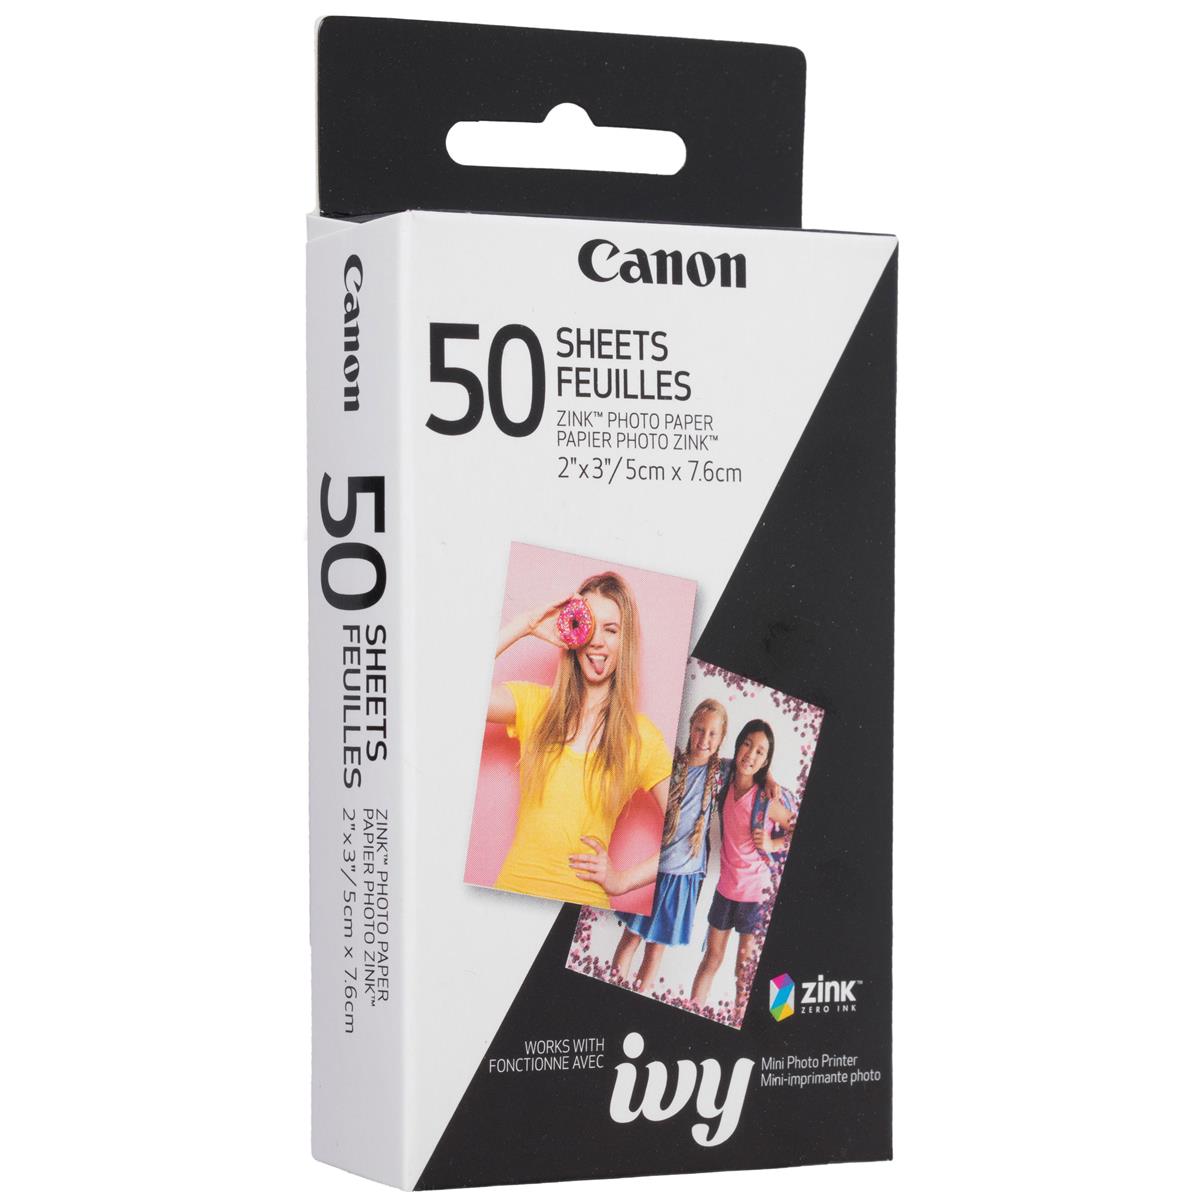 Canon 2 x 3" ZINK Photo Paper Pack  (50 Sheets)